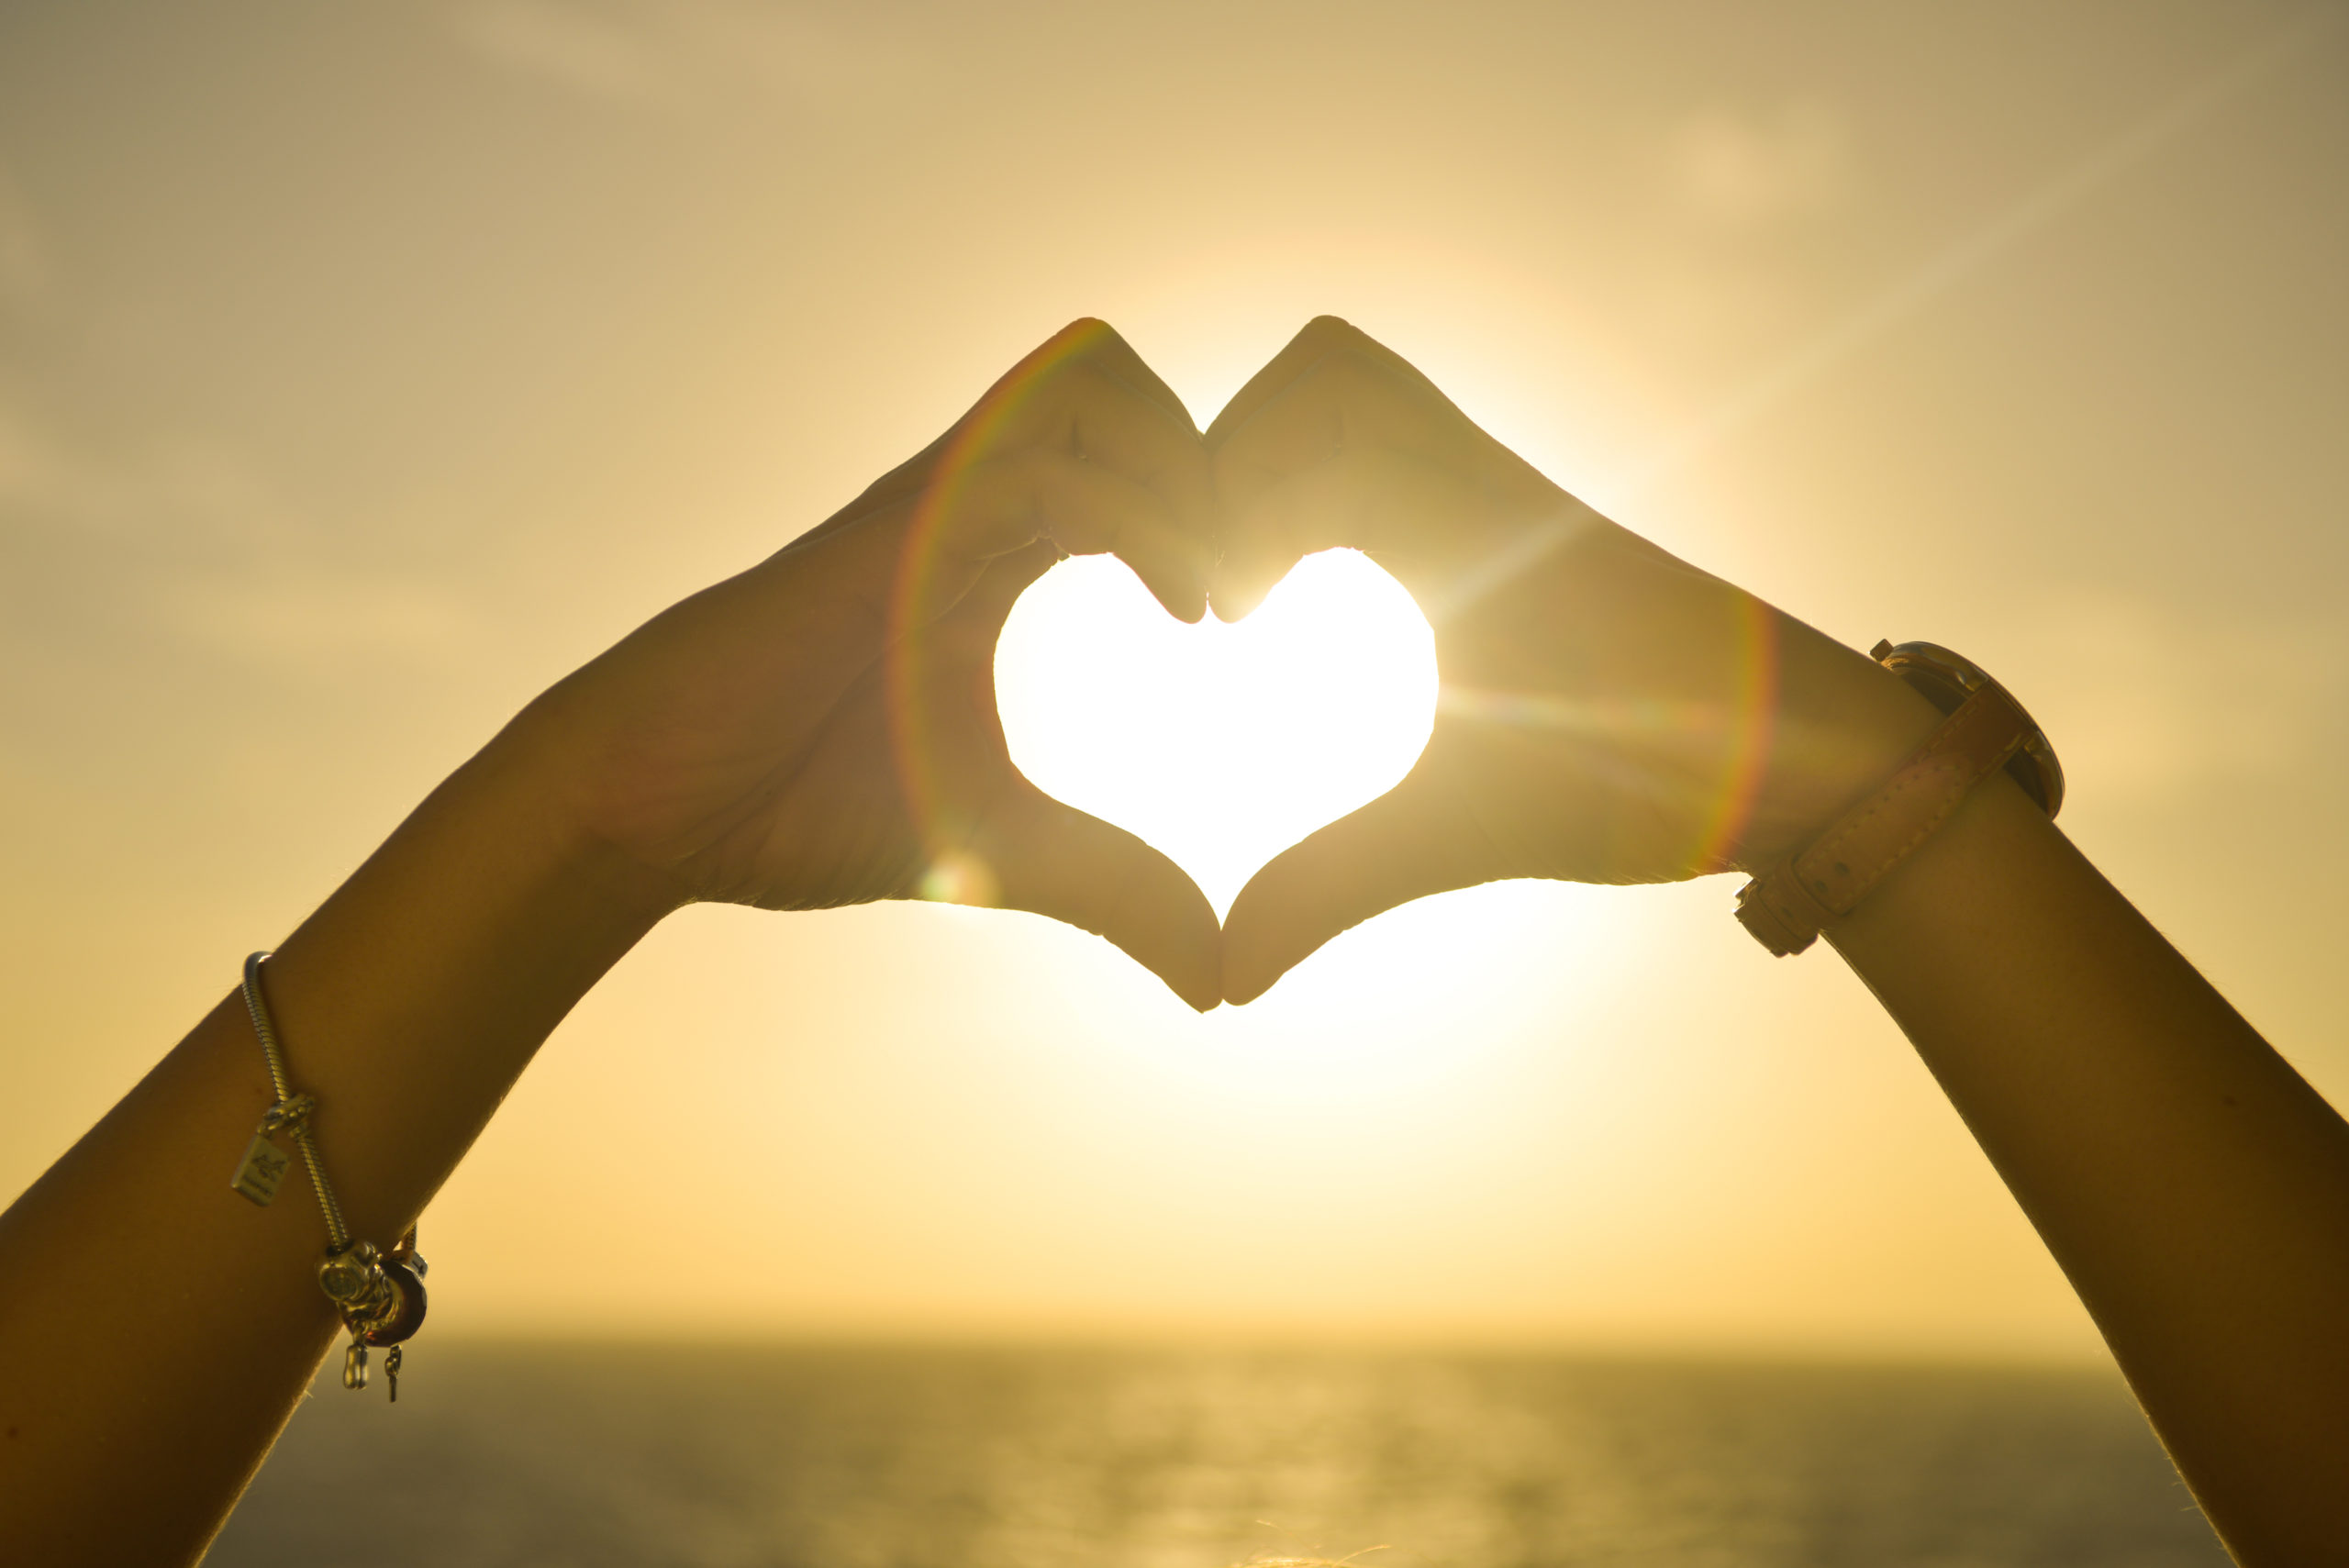 https://suehawkes.com/wp-content/uploads/2020/09/Canva-Two-People-Forming-Heart-Sign-to-Sun-scaled.jpg